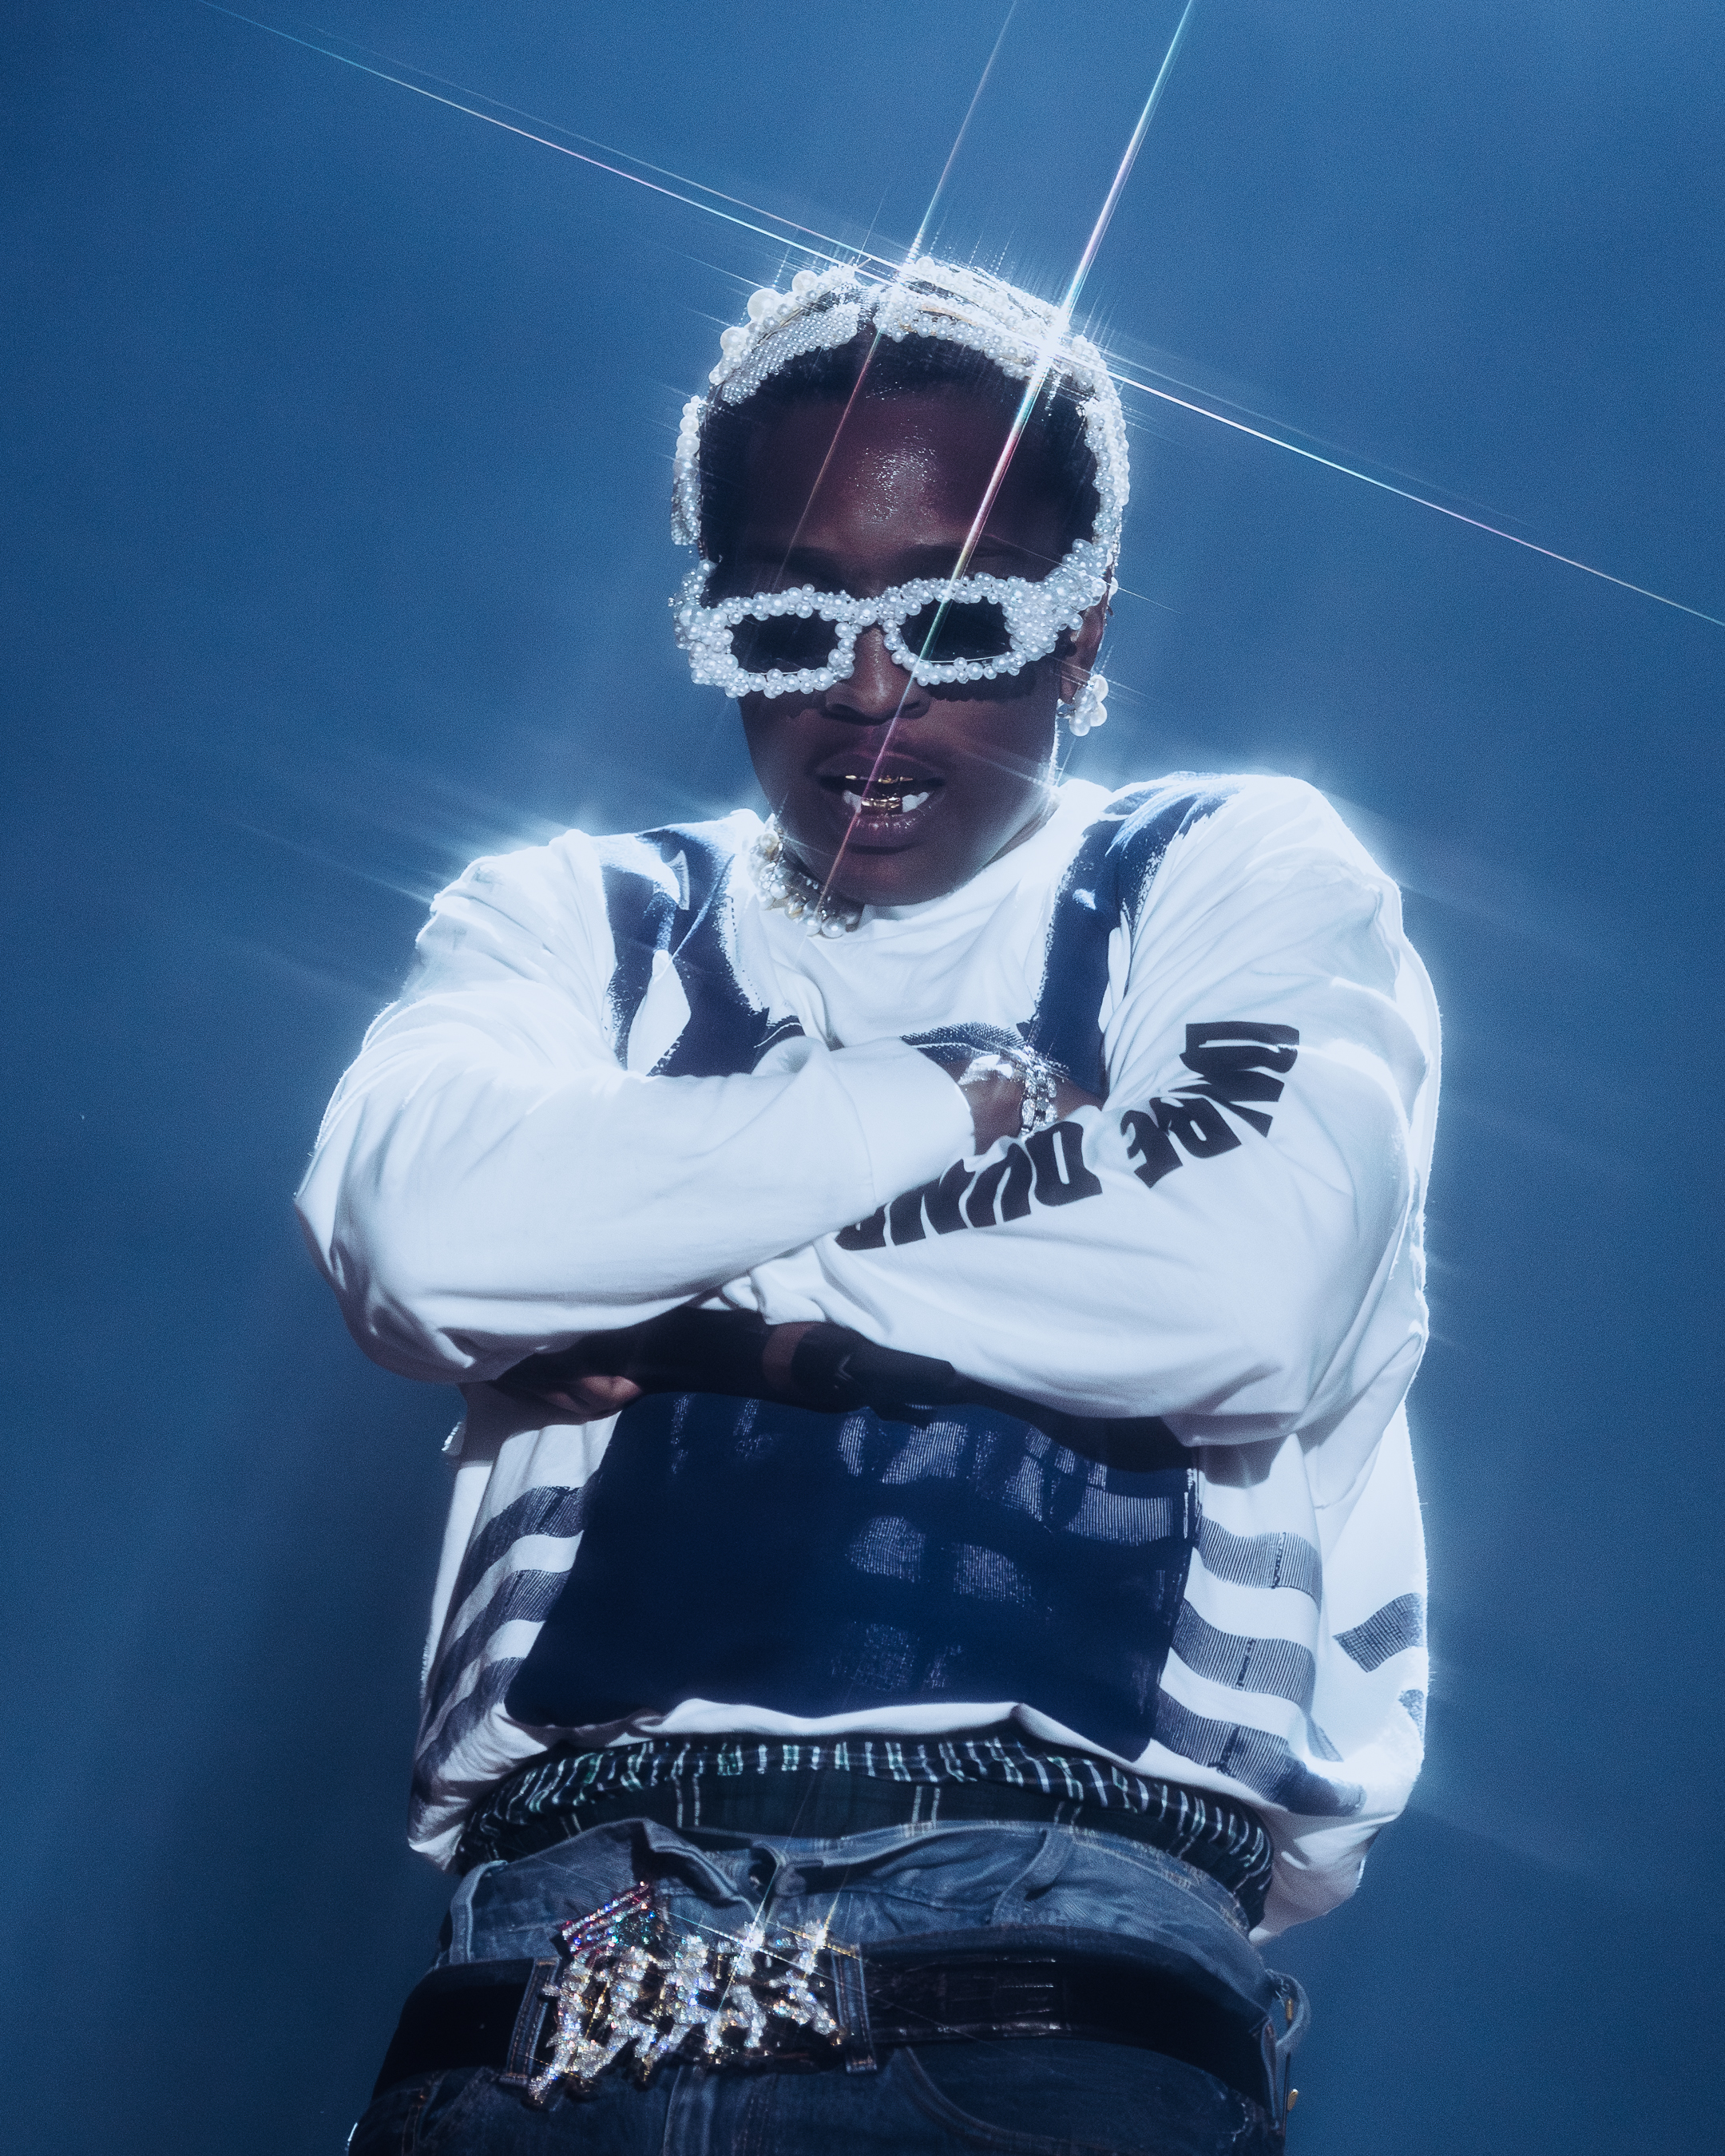 Who Is A$AP Rocky Dissing in His New Song?